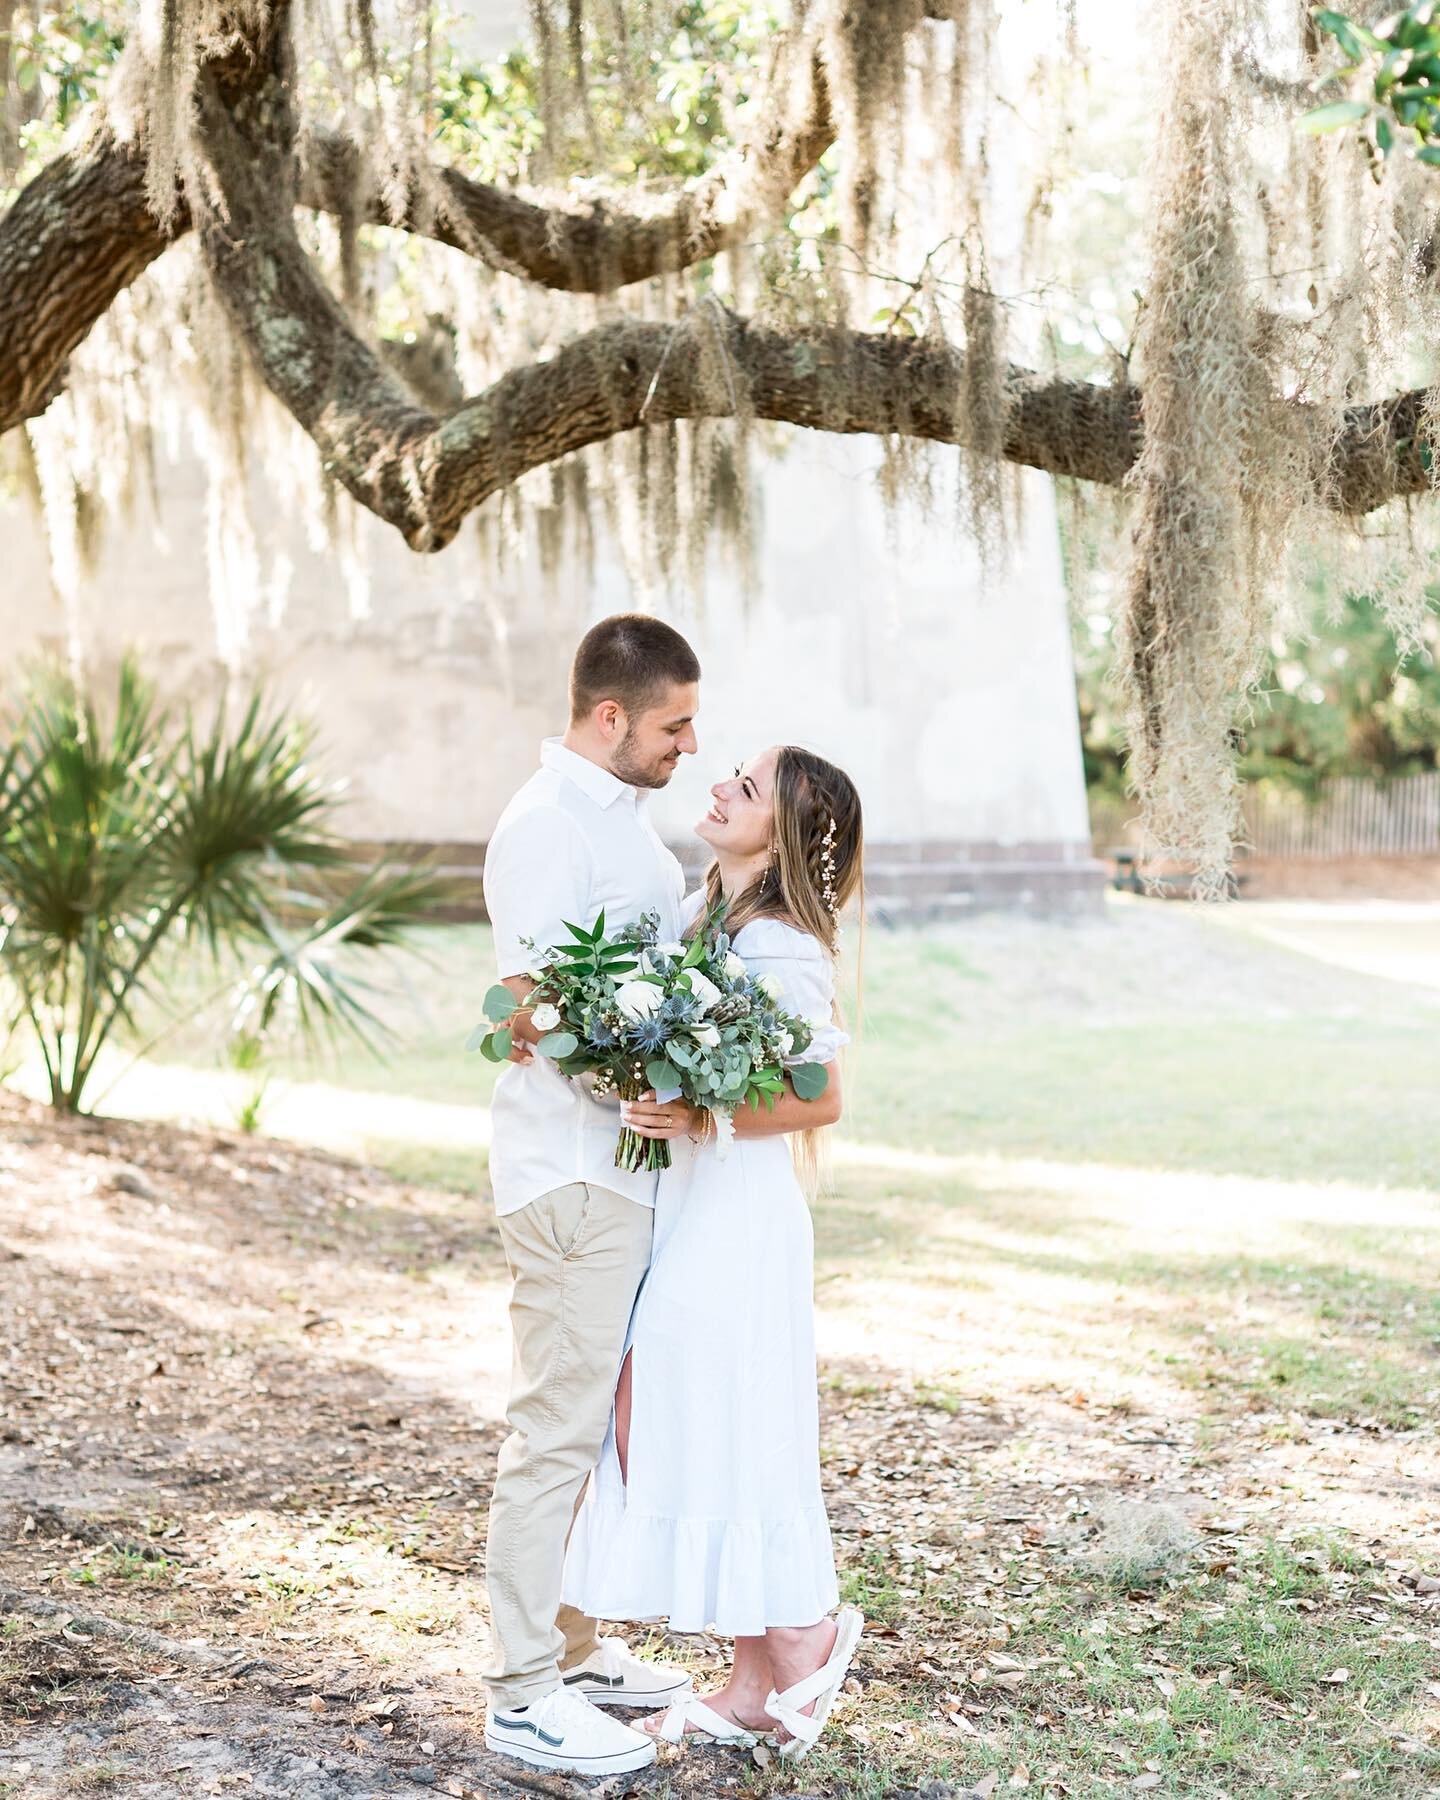 A picture-perfect day on Bald Head Island 💍 We loved getting to capture this sweet day with an even sweeter couple. Congrats Emma &amp; Calebe!

Photo by: Noah

Planner: @slovesplanning 

#baldheadislandwedding #baldheadwedding #baldheadweddingplann